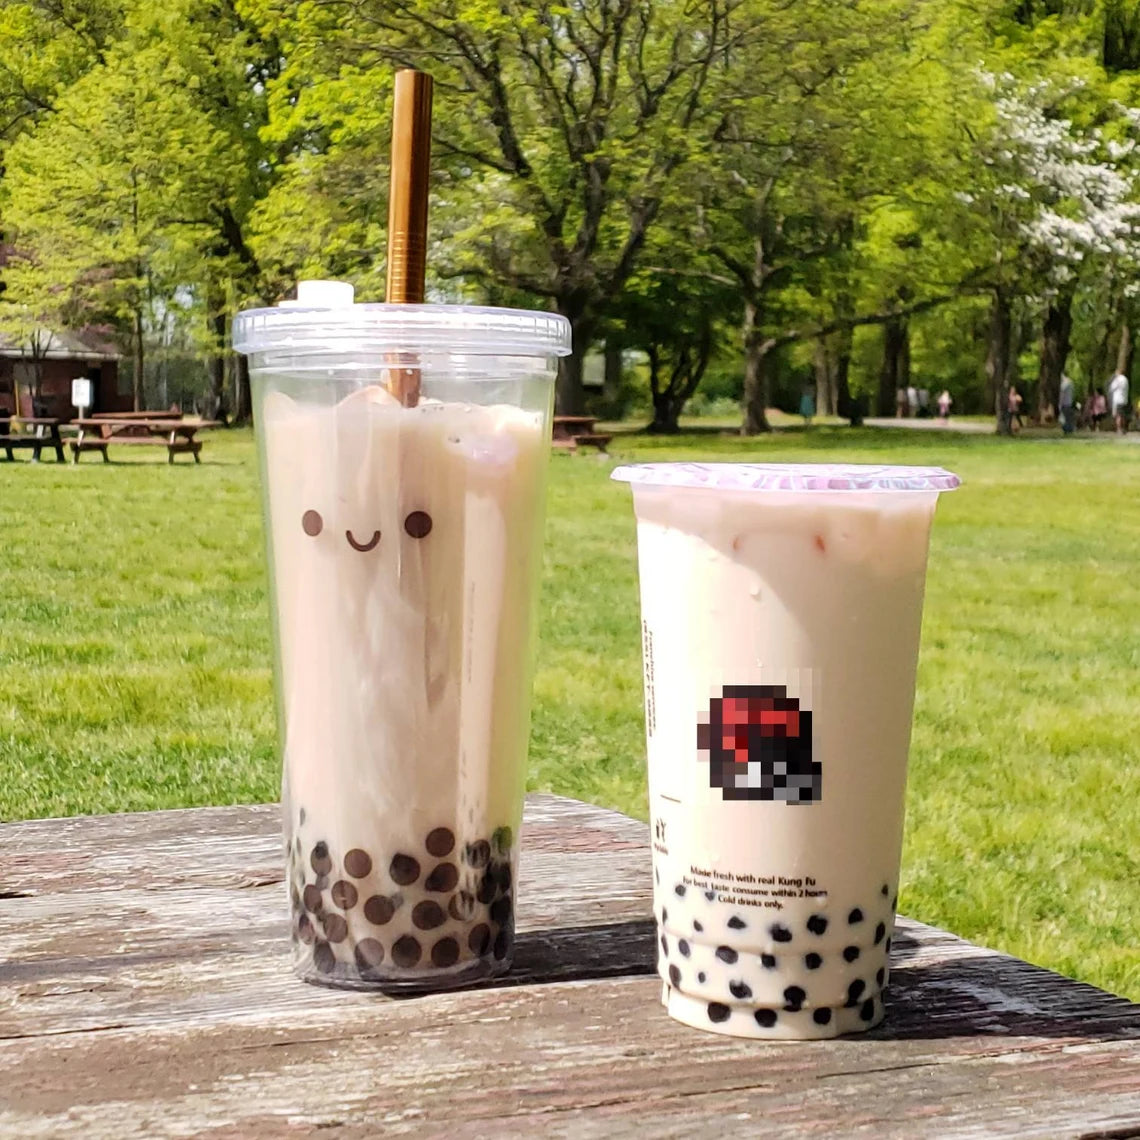 MaybeDaily Reusable Eco-Friendly Bubble Tea Boba Cup with Stainless Steel Straw Bubble Tea Boba Character Tumbler